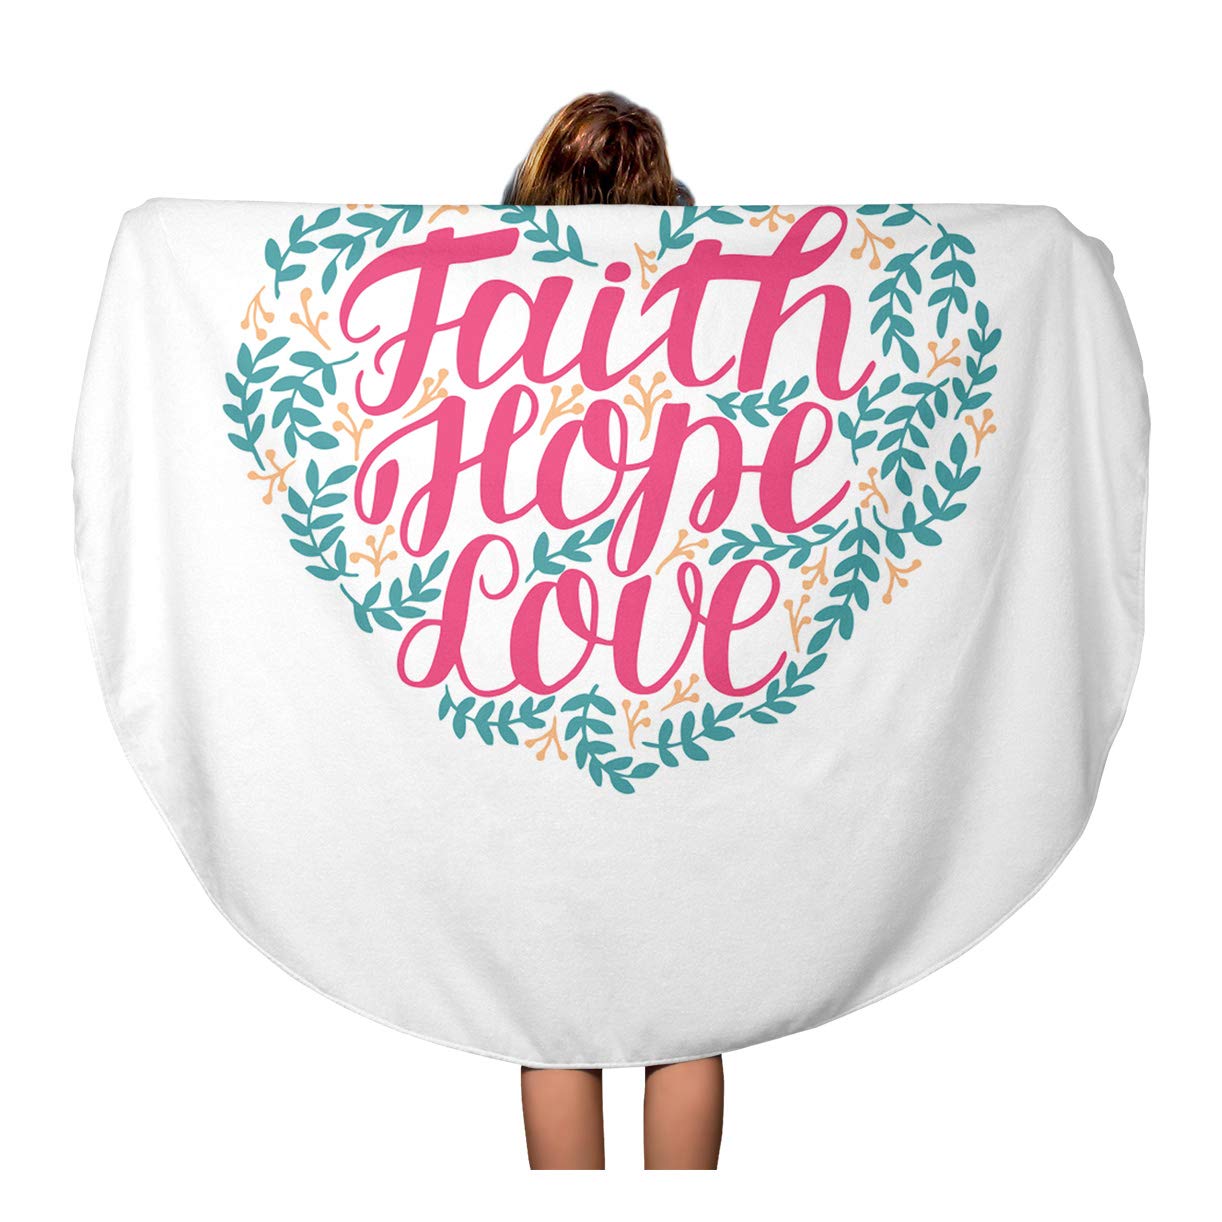 KDAGR 60 inch Round Beach Towel Blanket Hand Lettering Faith Hope and Love in Shape Travel Circle Circular Towels Mat Tapestry Beach Throw - image 1 of 2